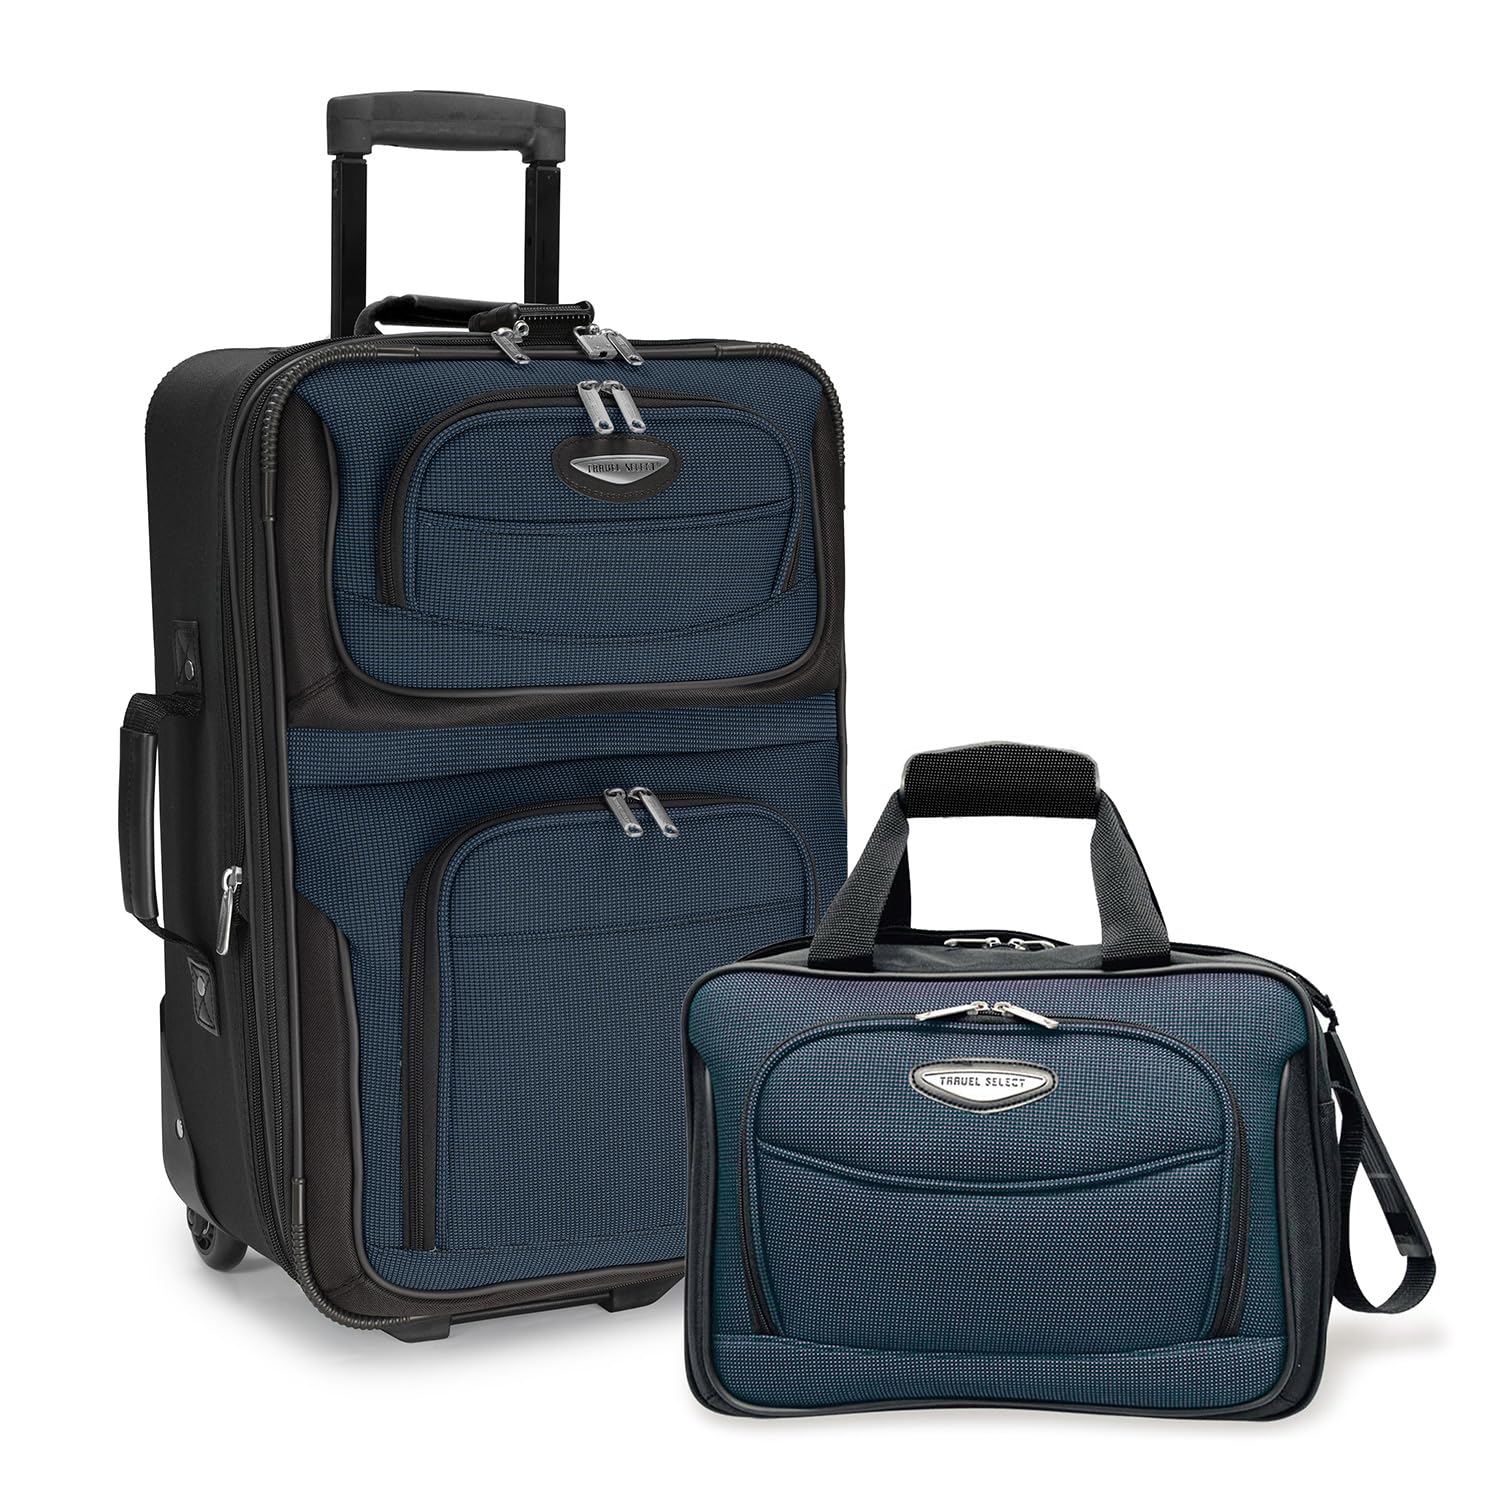 Travel Select Amsterdam Expandable Rolling Upright Luggage, Navy, 2-Piece Set